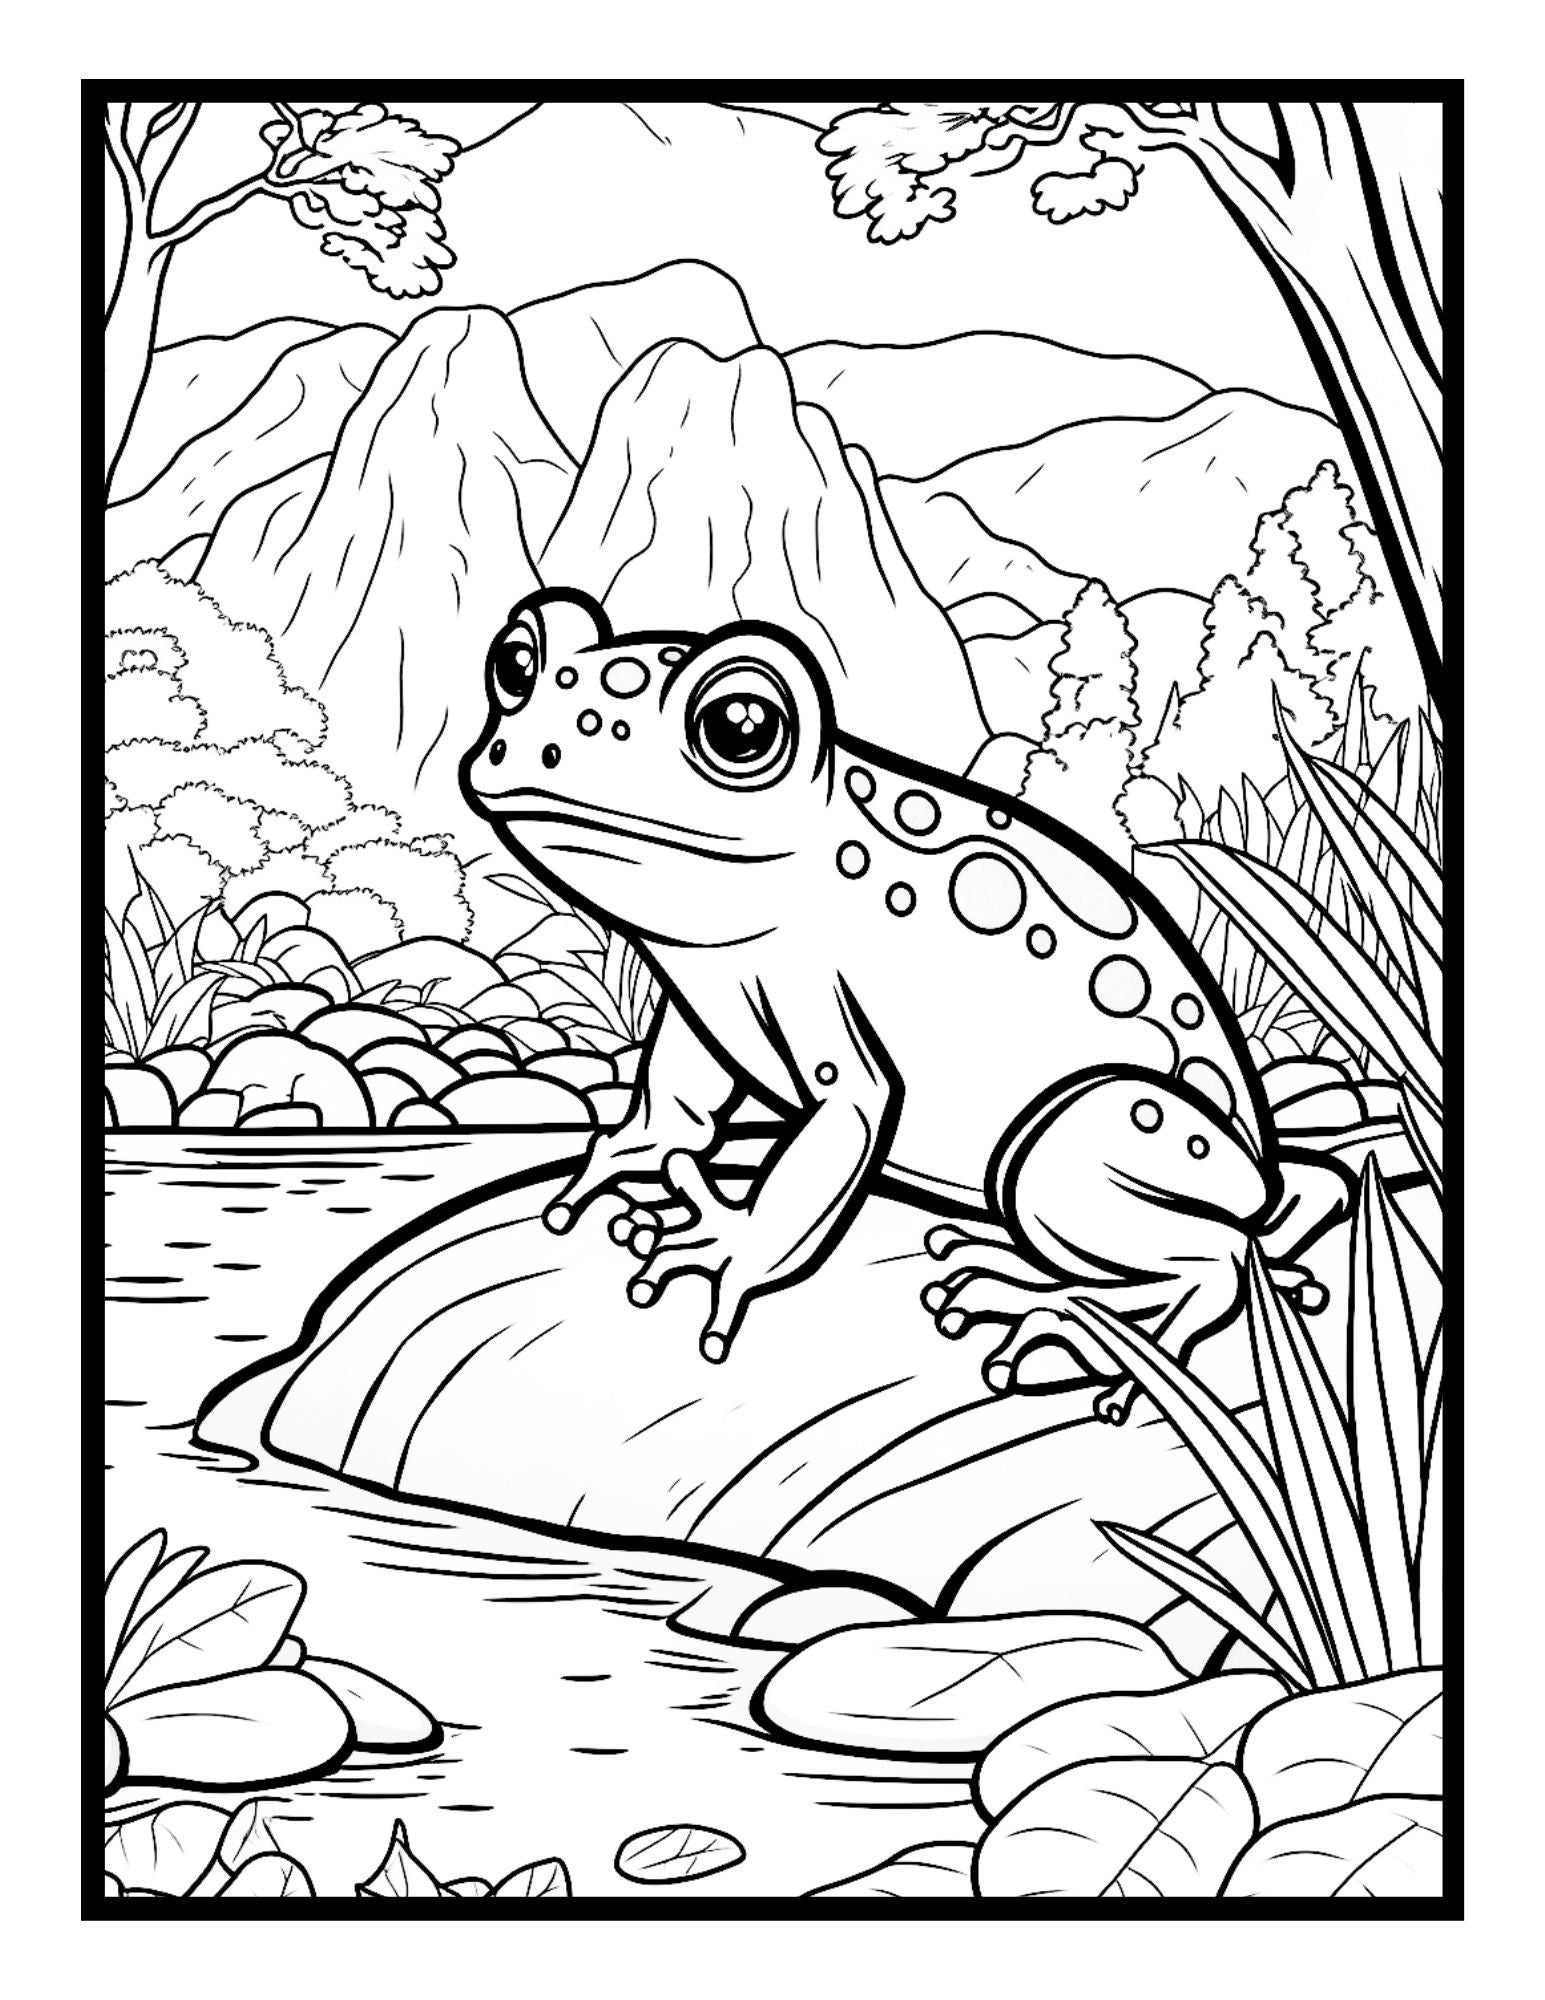 Cute Toad Coloring Book Frog Coloring Book For Adult And Kids Animal H –  Mode Art Design